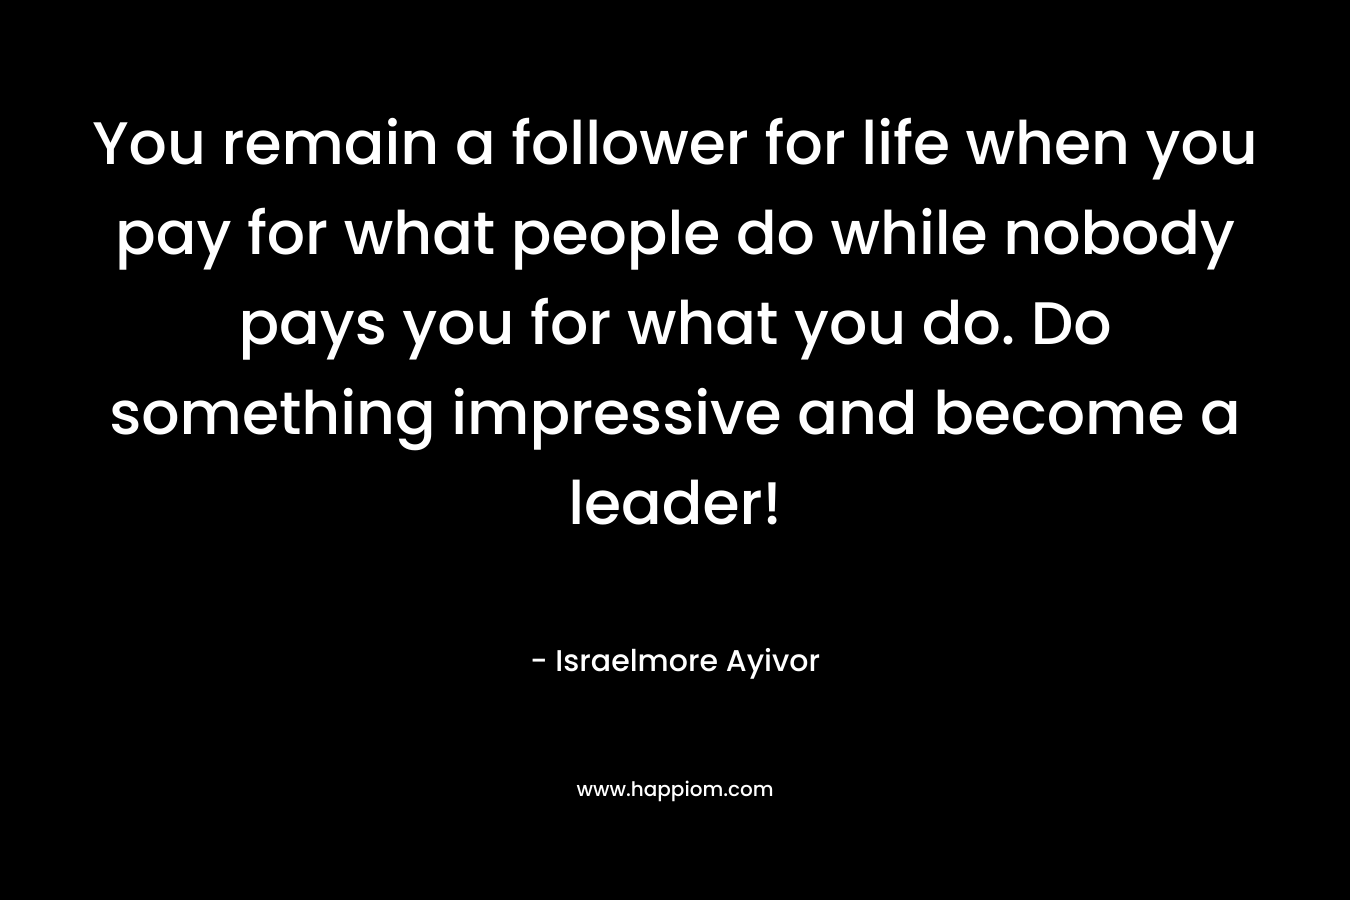 You remain a follower for life when you pay for what people do while nobody pays you for what you do. Do something impressive and become a leader!